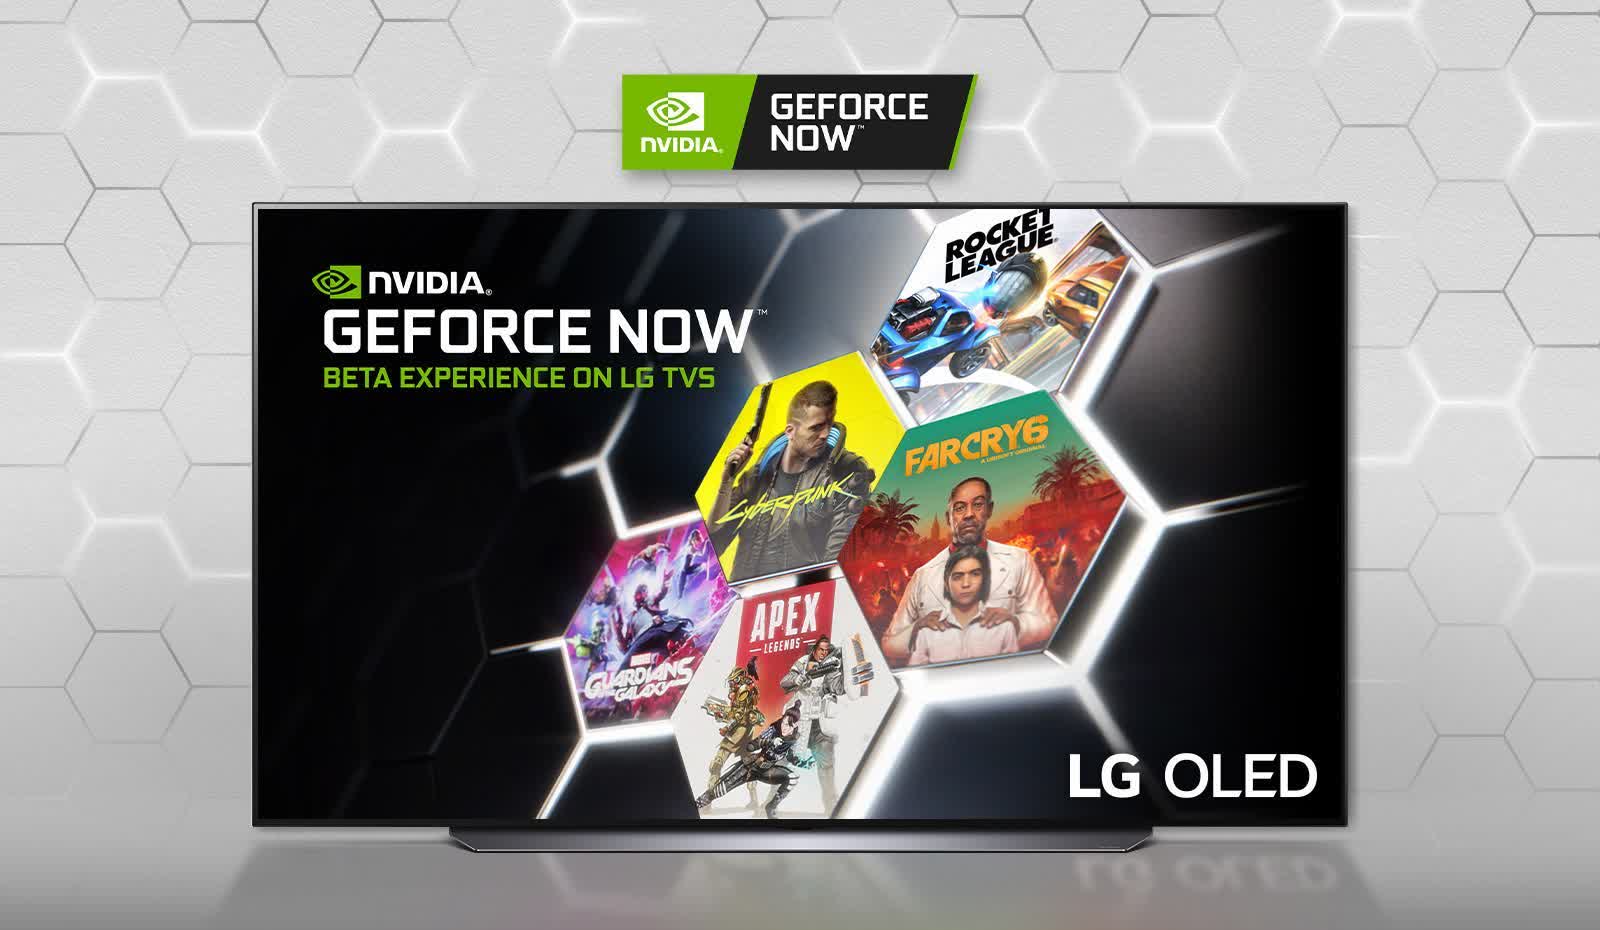 The GeForce Now app has started rolling out to LG TVs